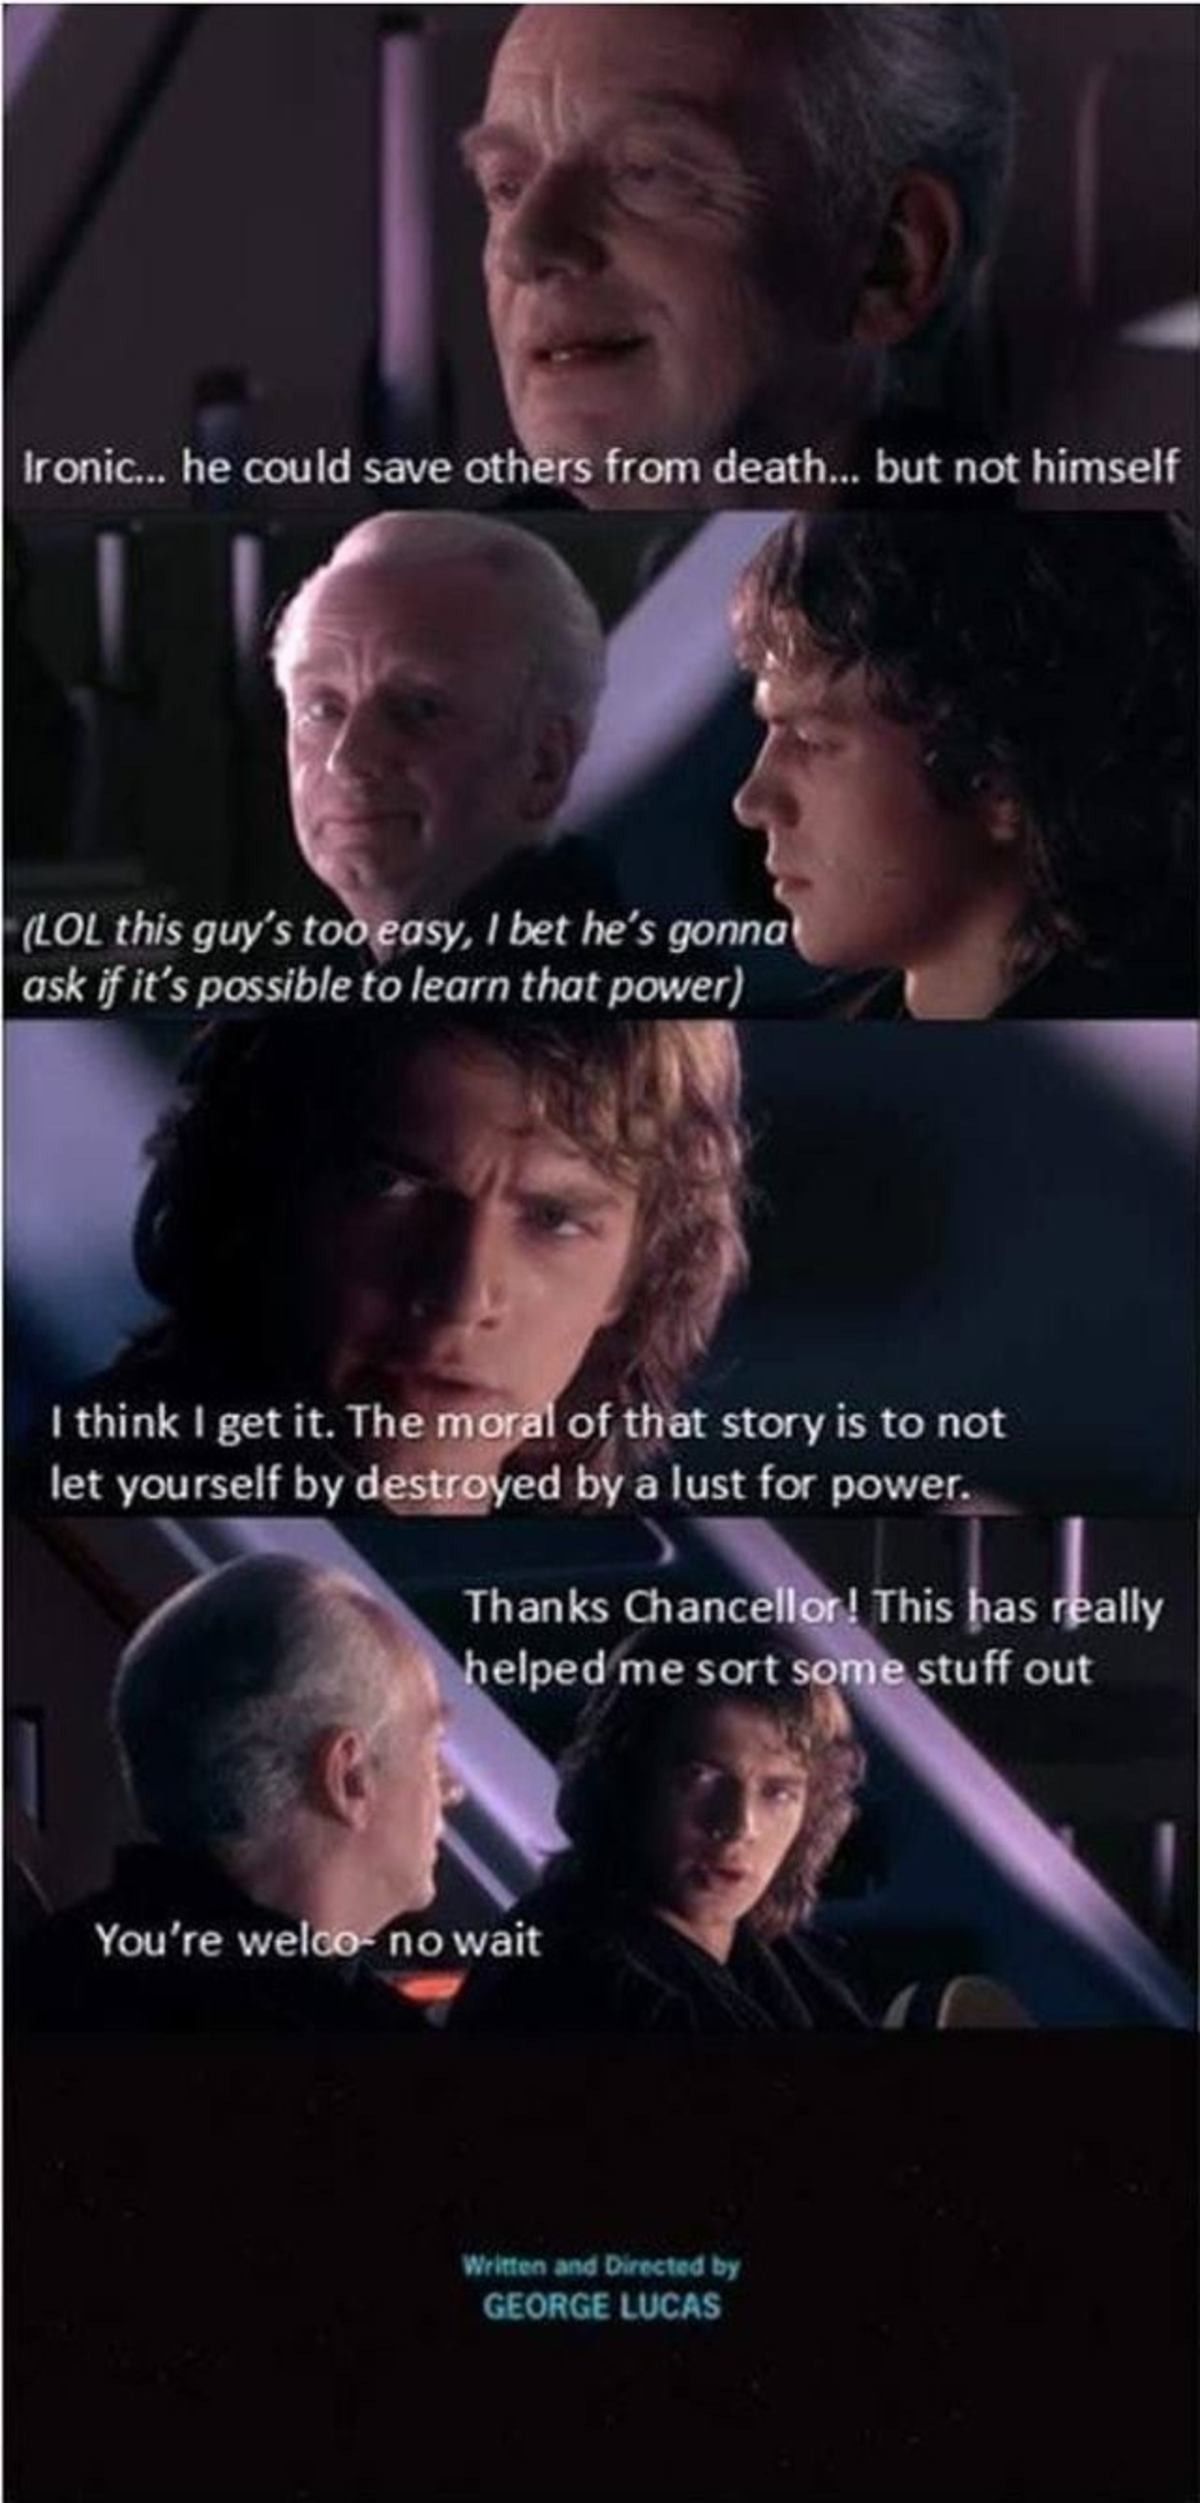 thank you palpatine, i see the errors of my ways